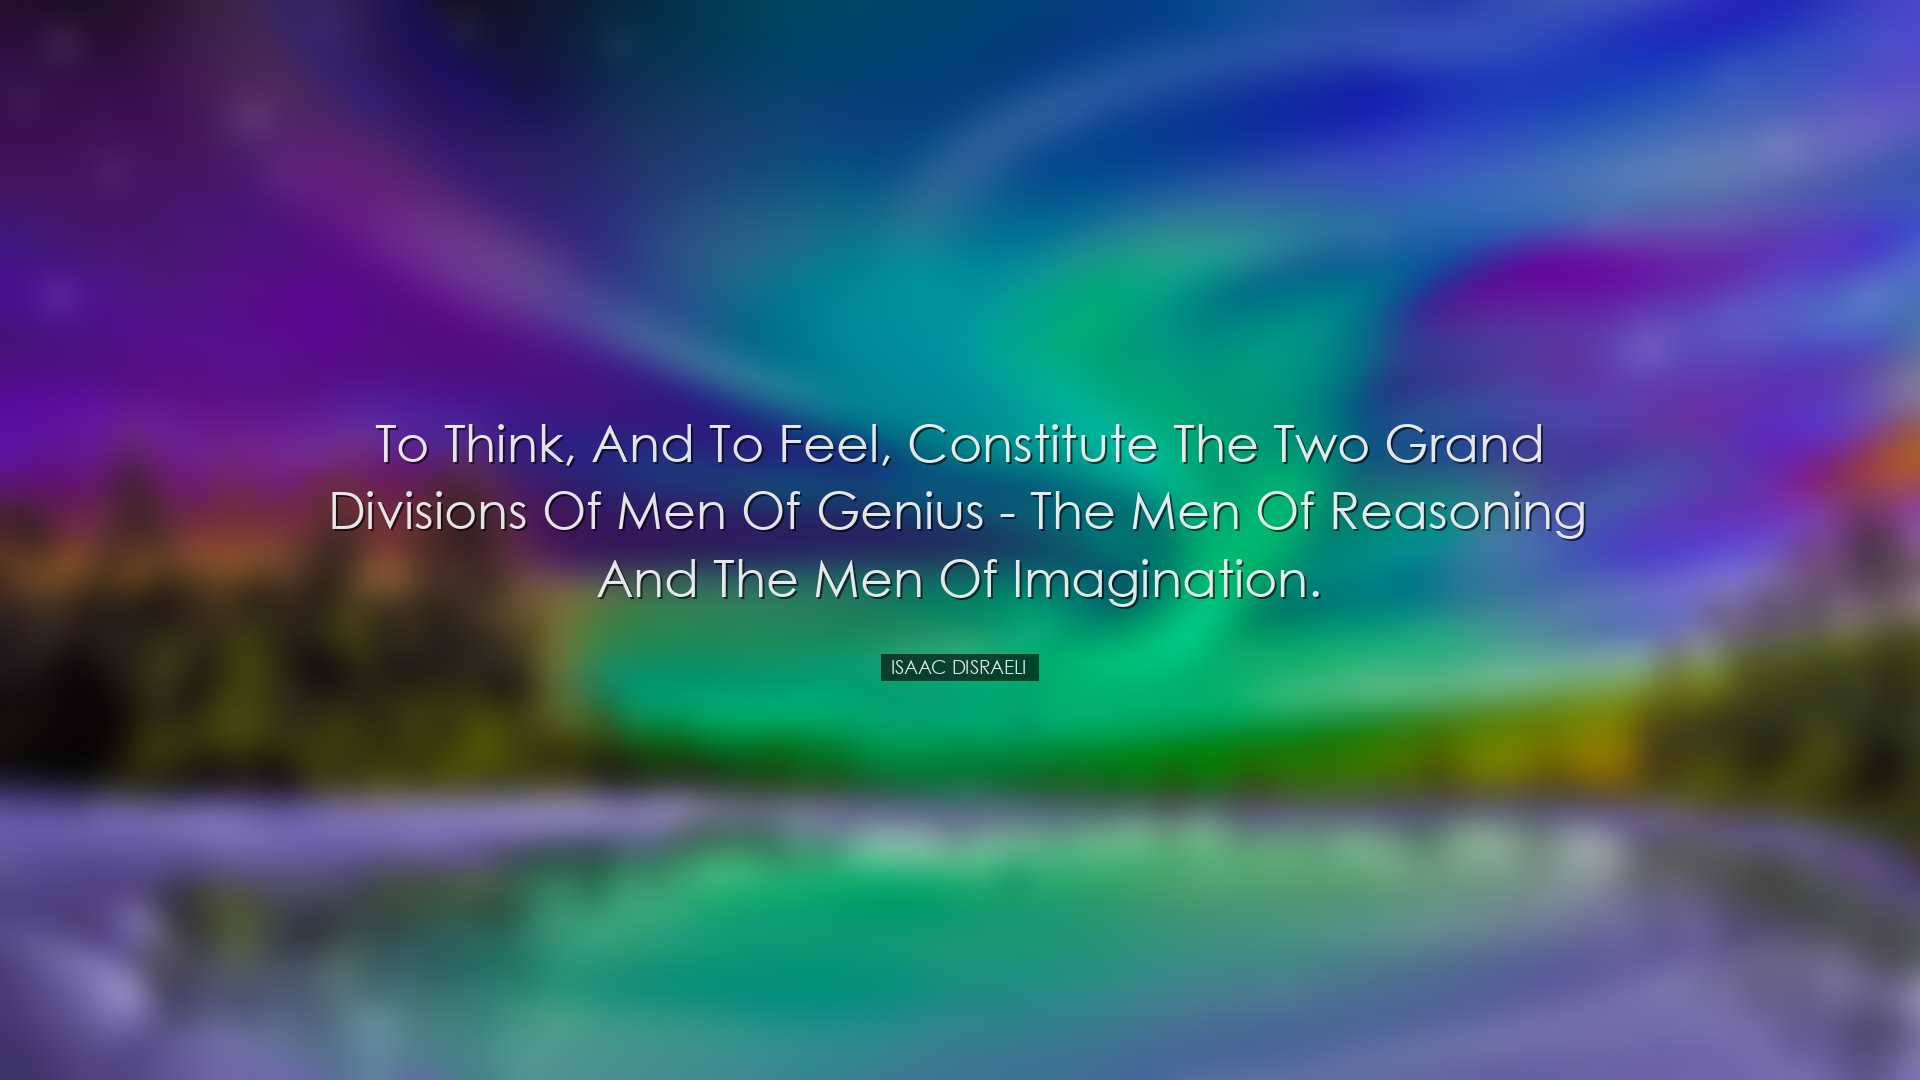 To think, and to feel, constitute the two grand divisions of men o